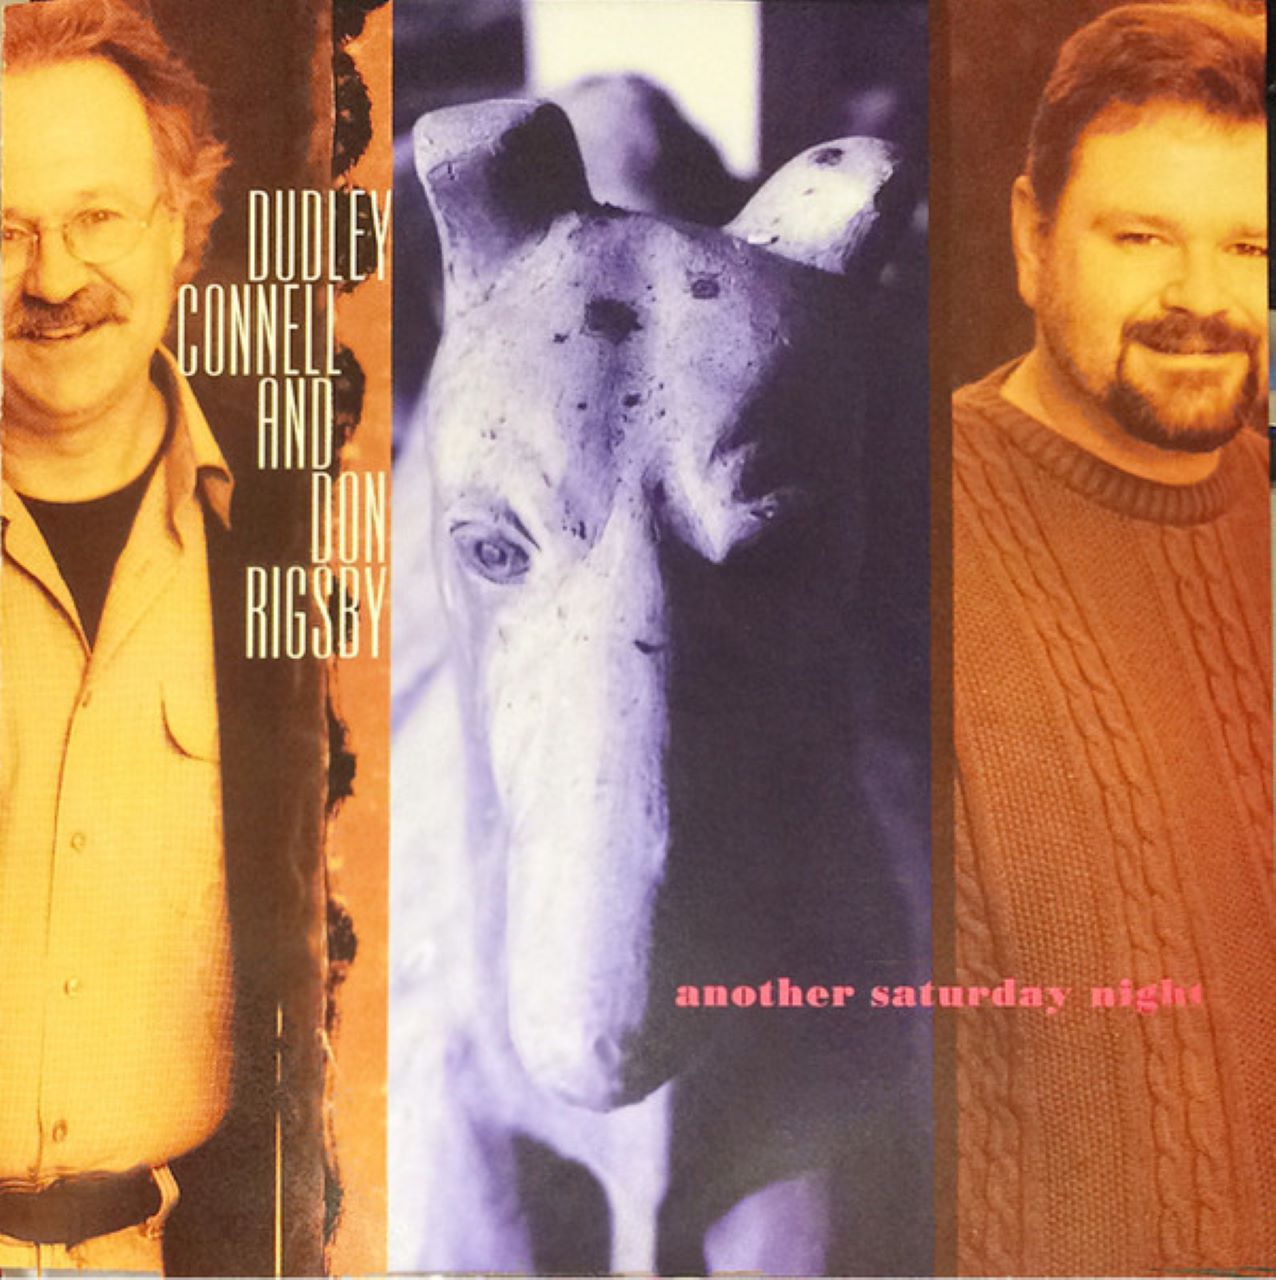 Dudley Connell & Don Rigsby - Another Saturday Night cover album